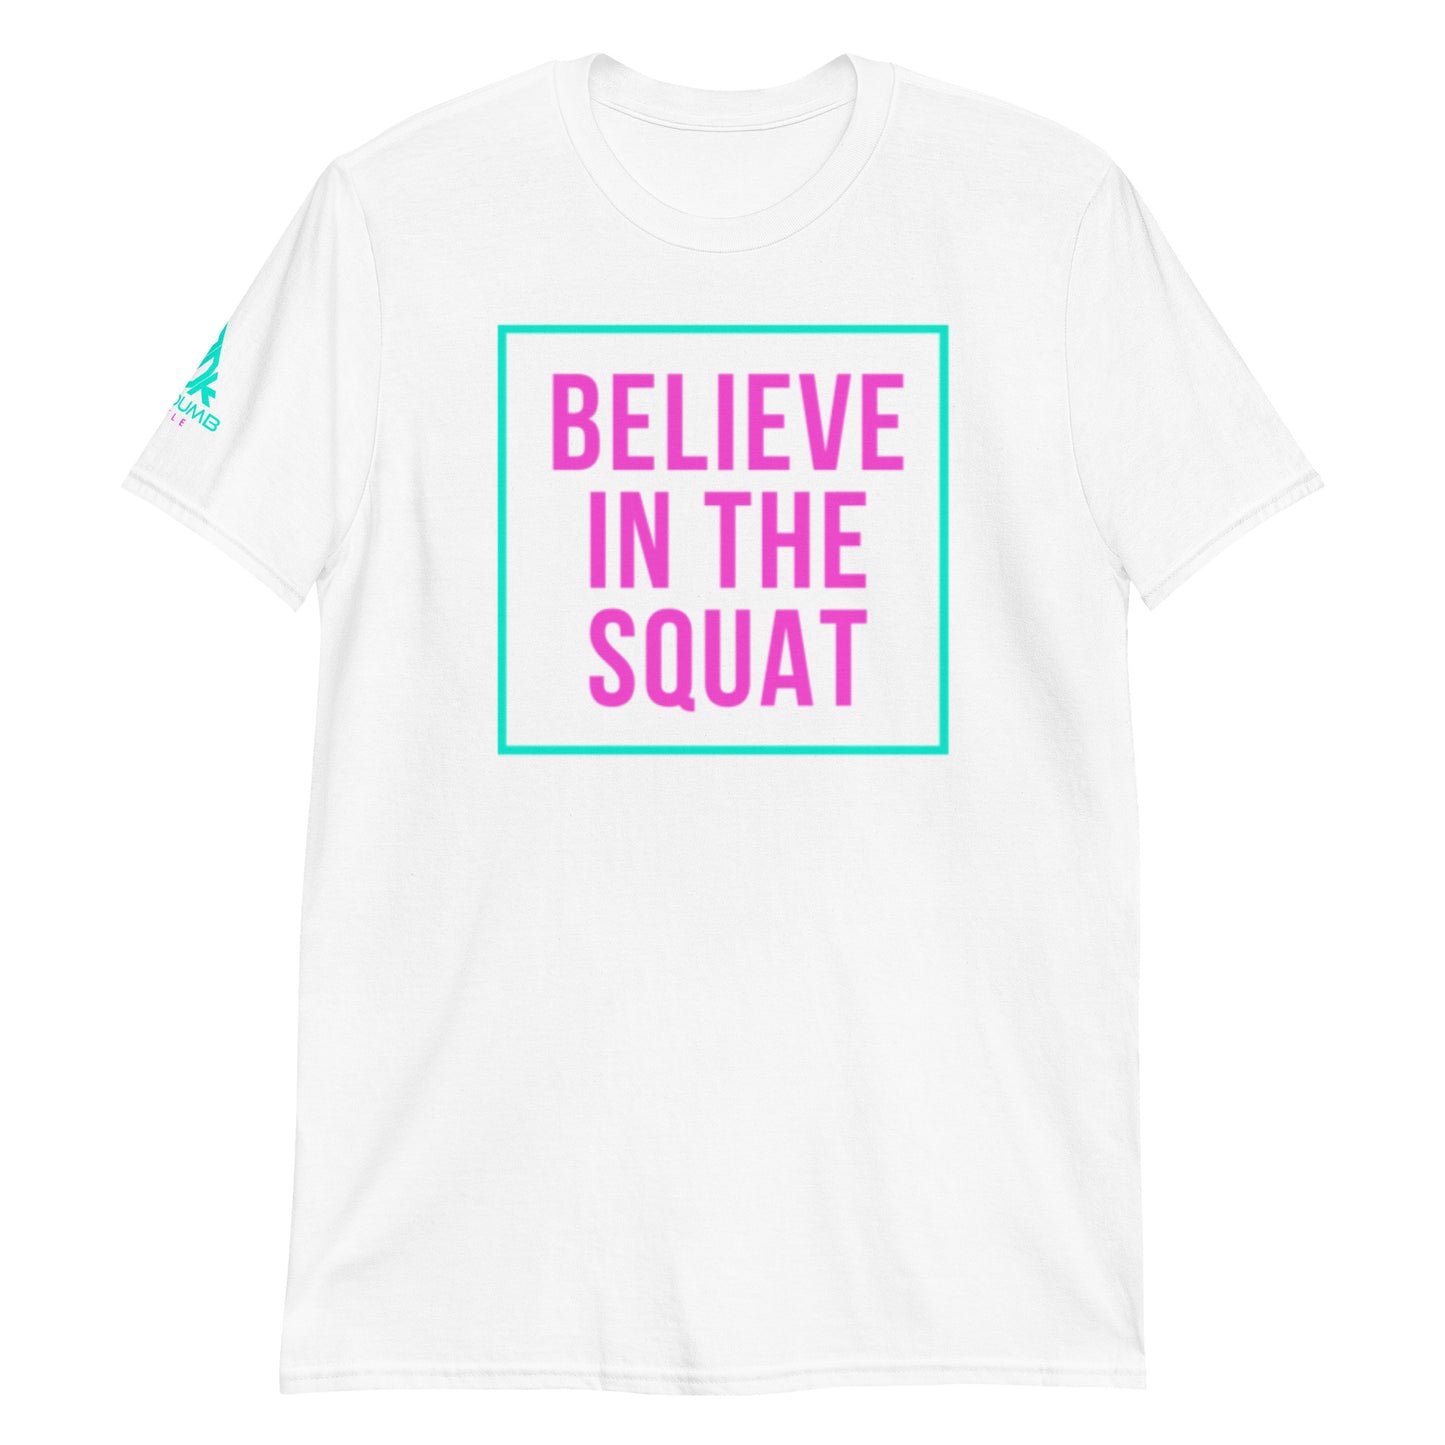 Believe in the Squat: Midnight Party